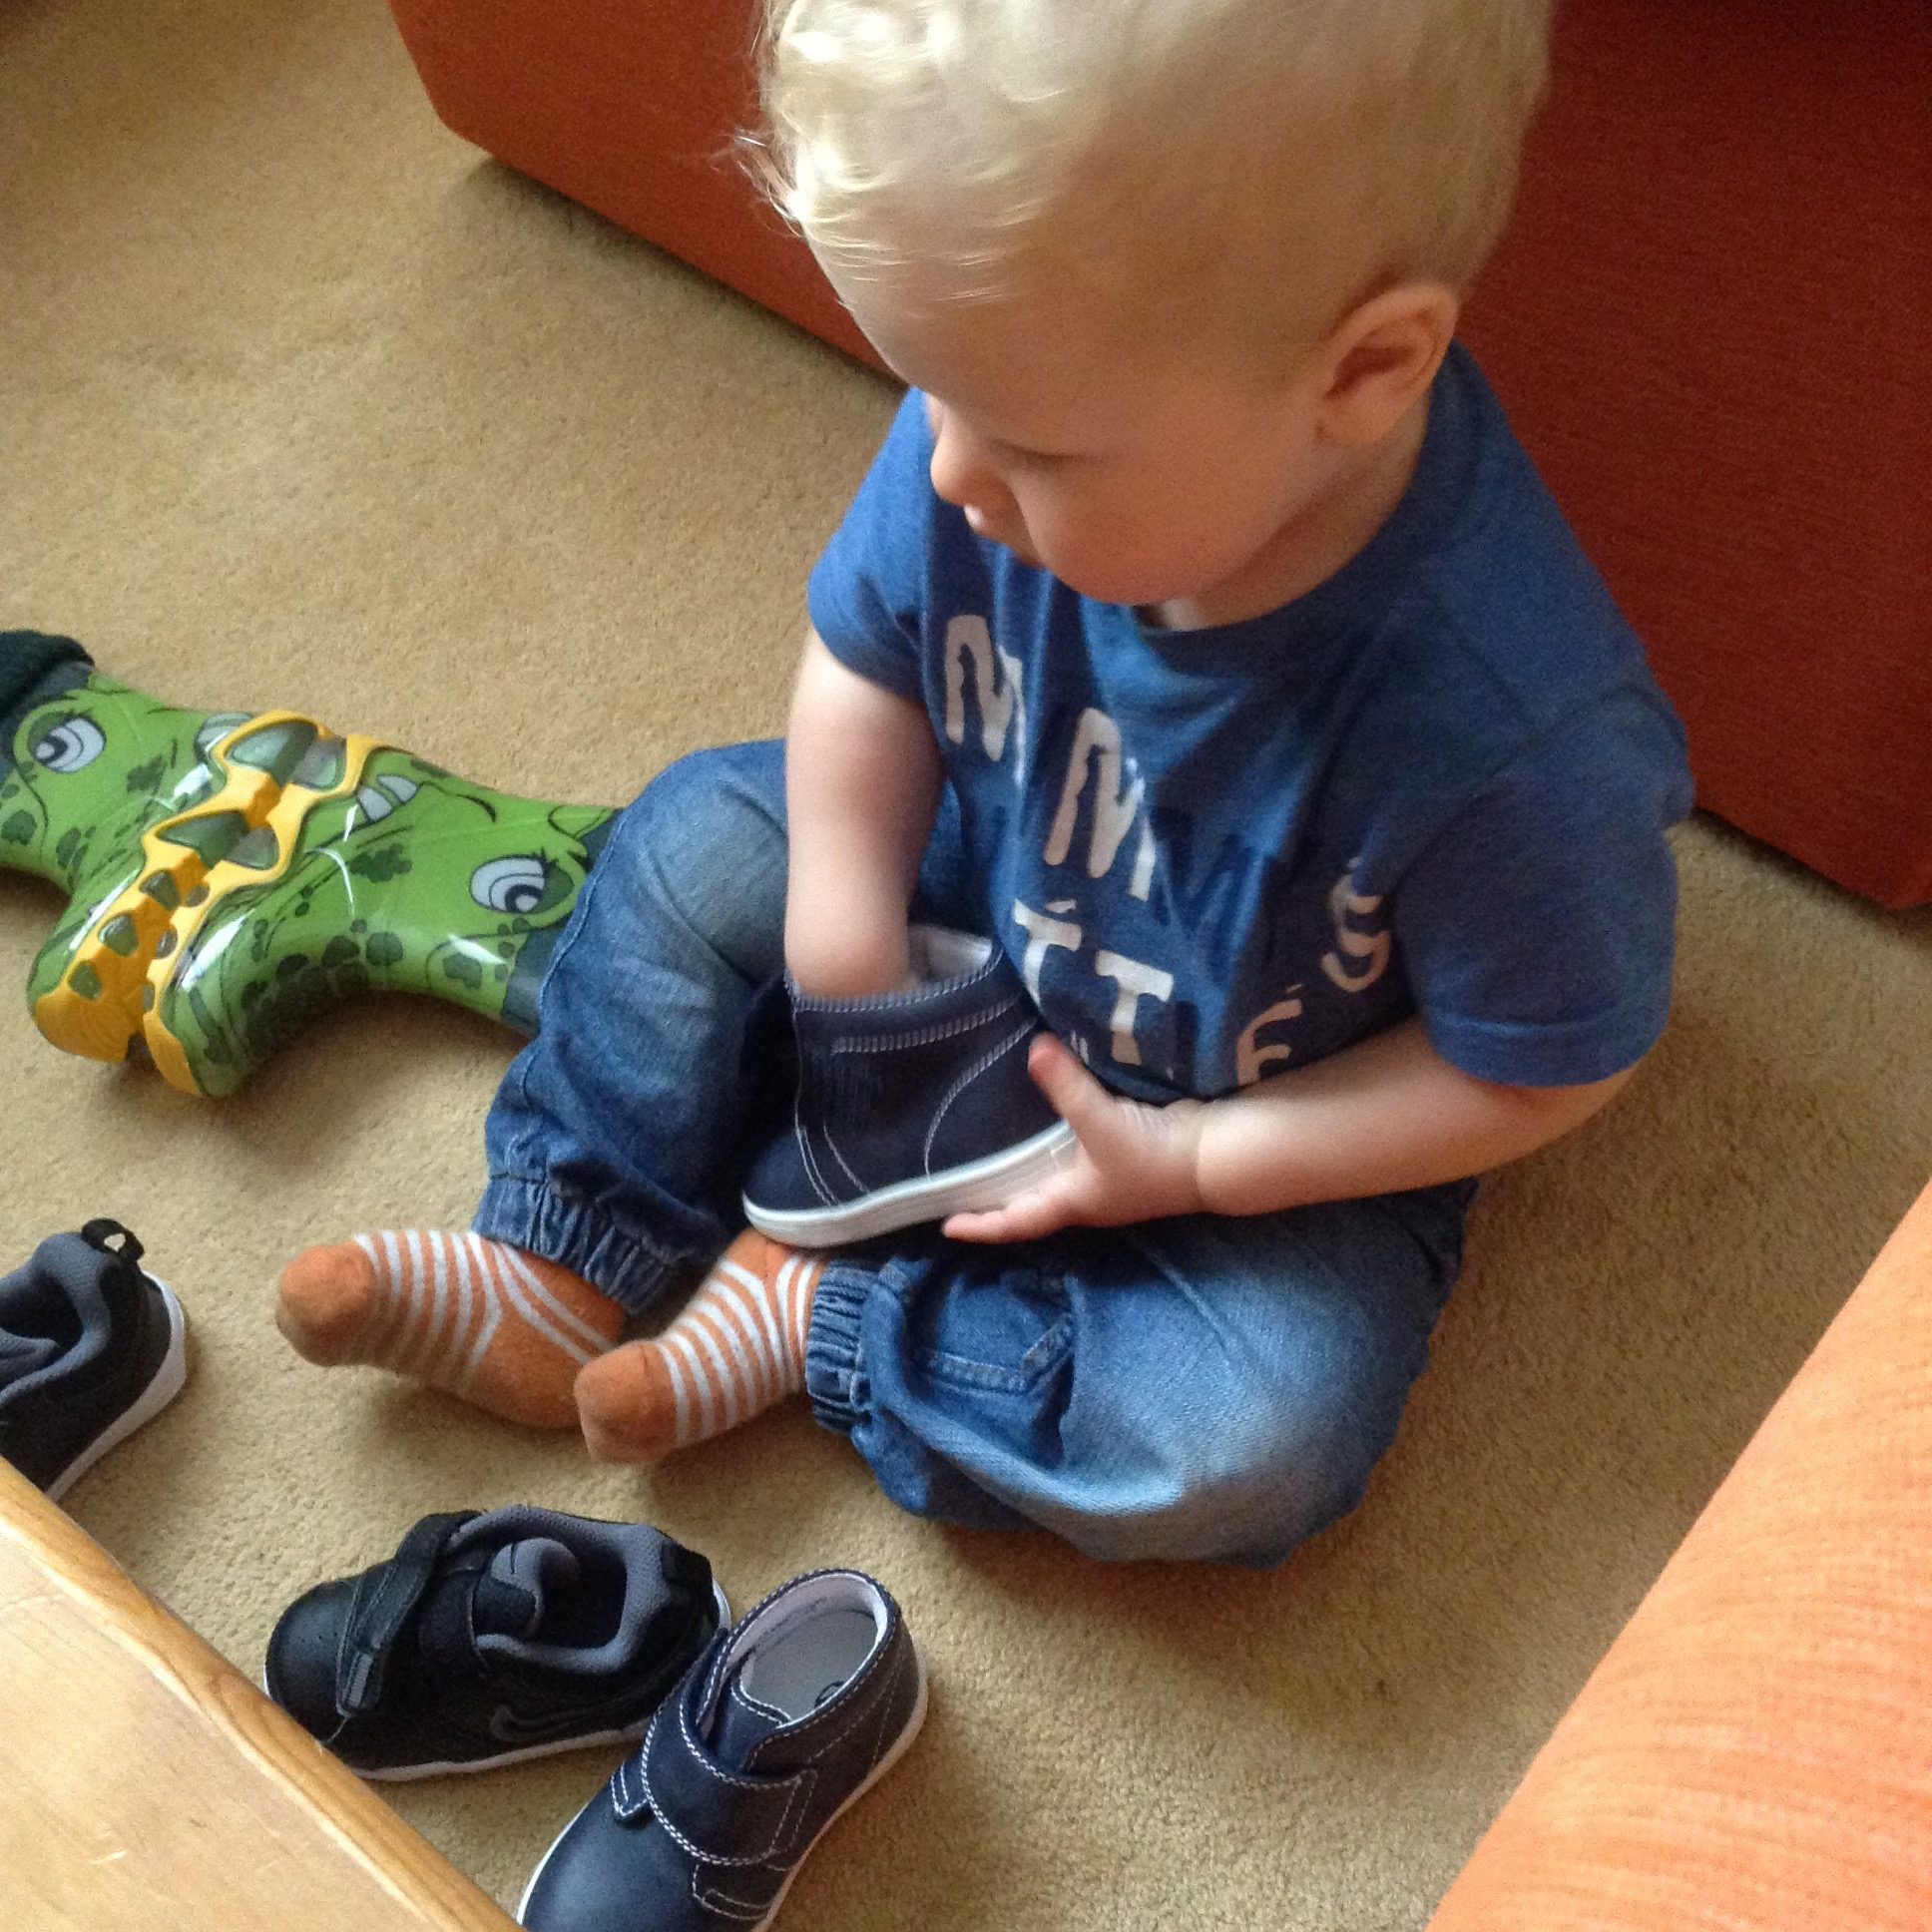 Lucas sat down looking at his new shoes